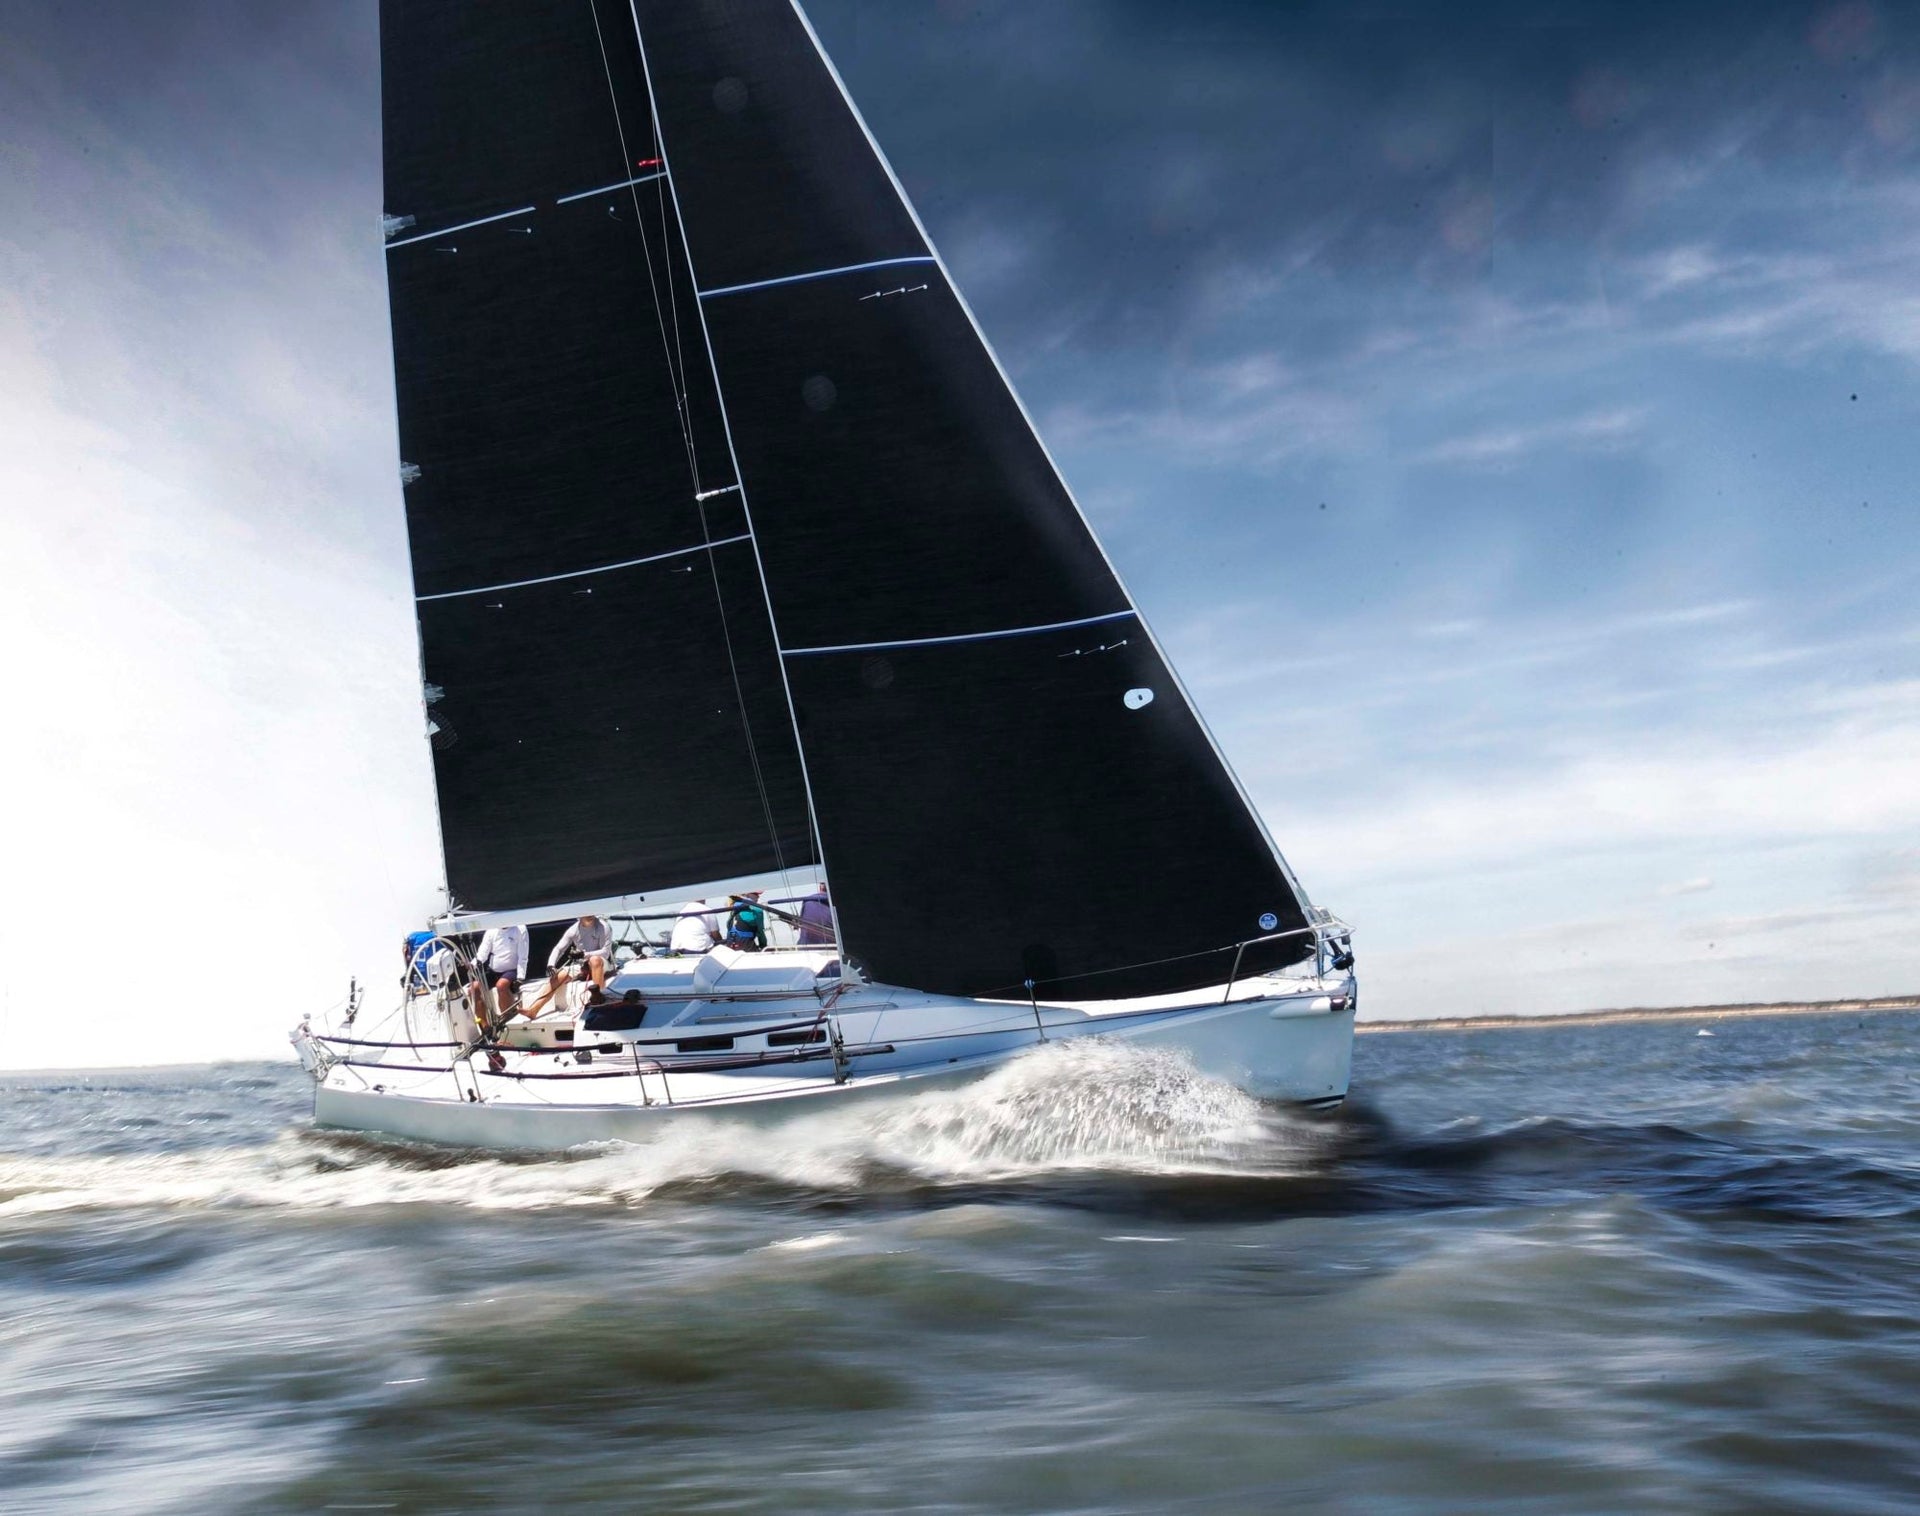 RORC Easter challenge 2016